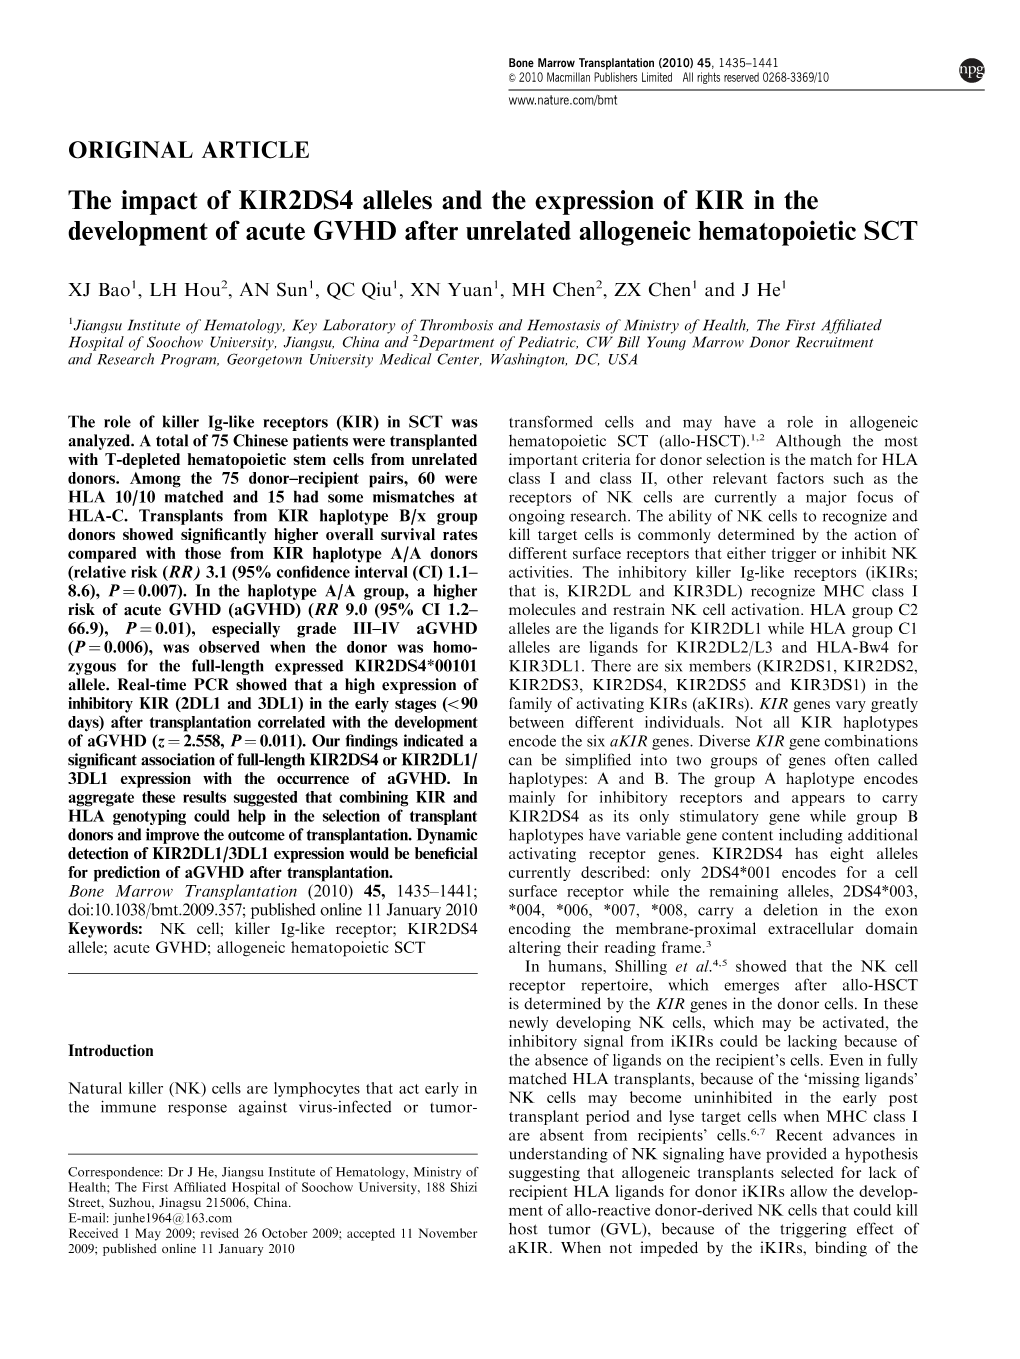 The Impact of KIR2DS4 Alleles and the Expression of KIR in the Development of Acute GVHD After Unrelated Allogeneic Hematopoietic SCT